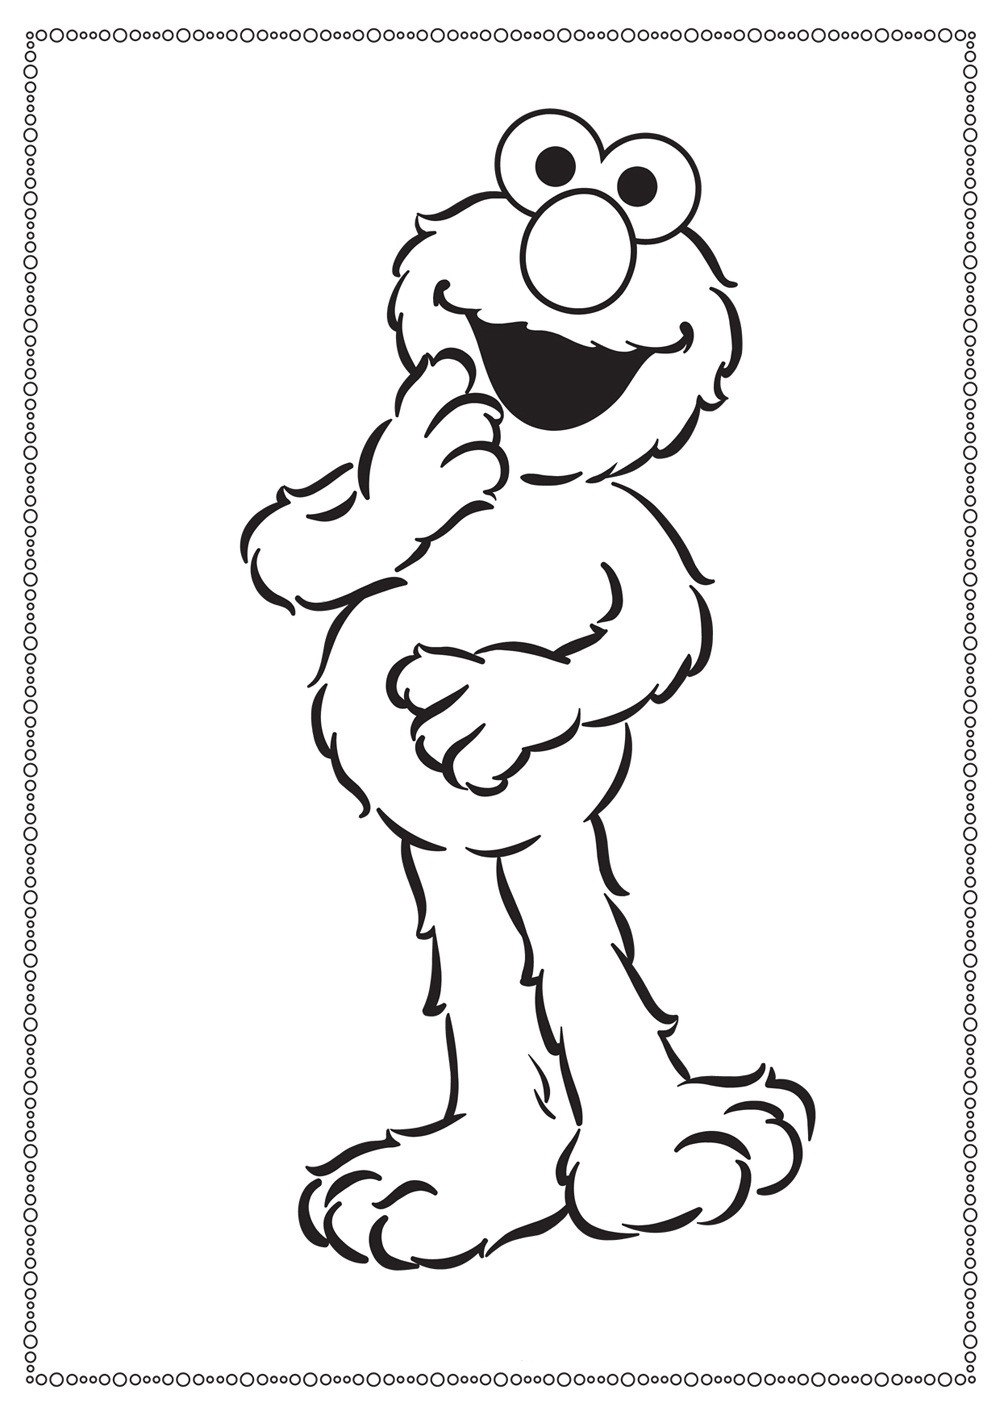 Printable Coloring Pages For Teenagers
 Free Printable Elmo Coloring Pages For Kids